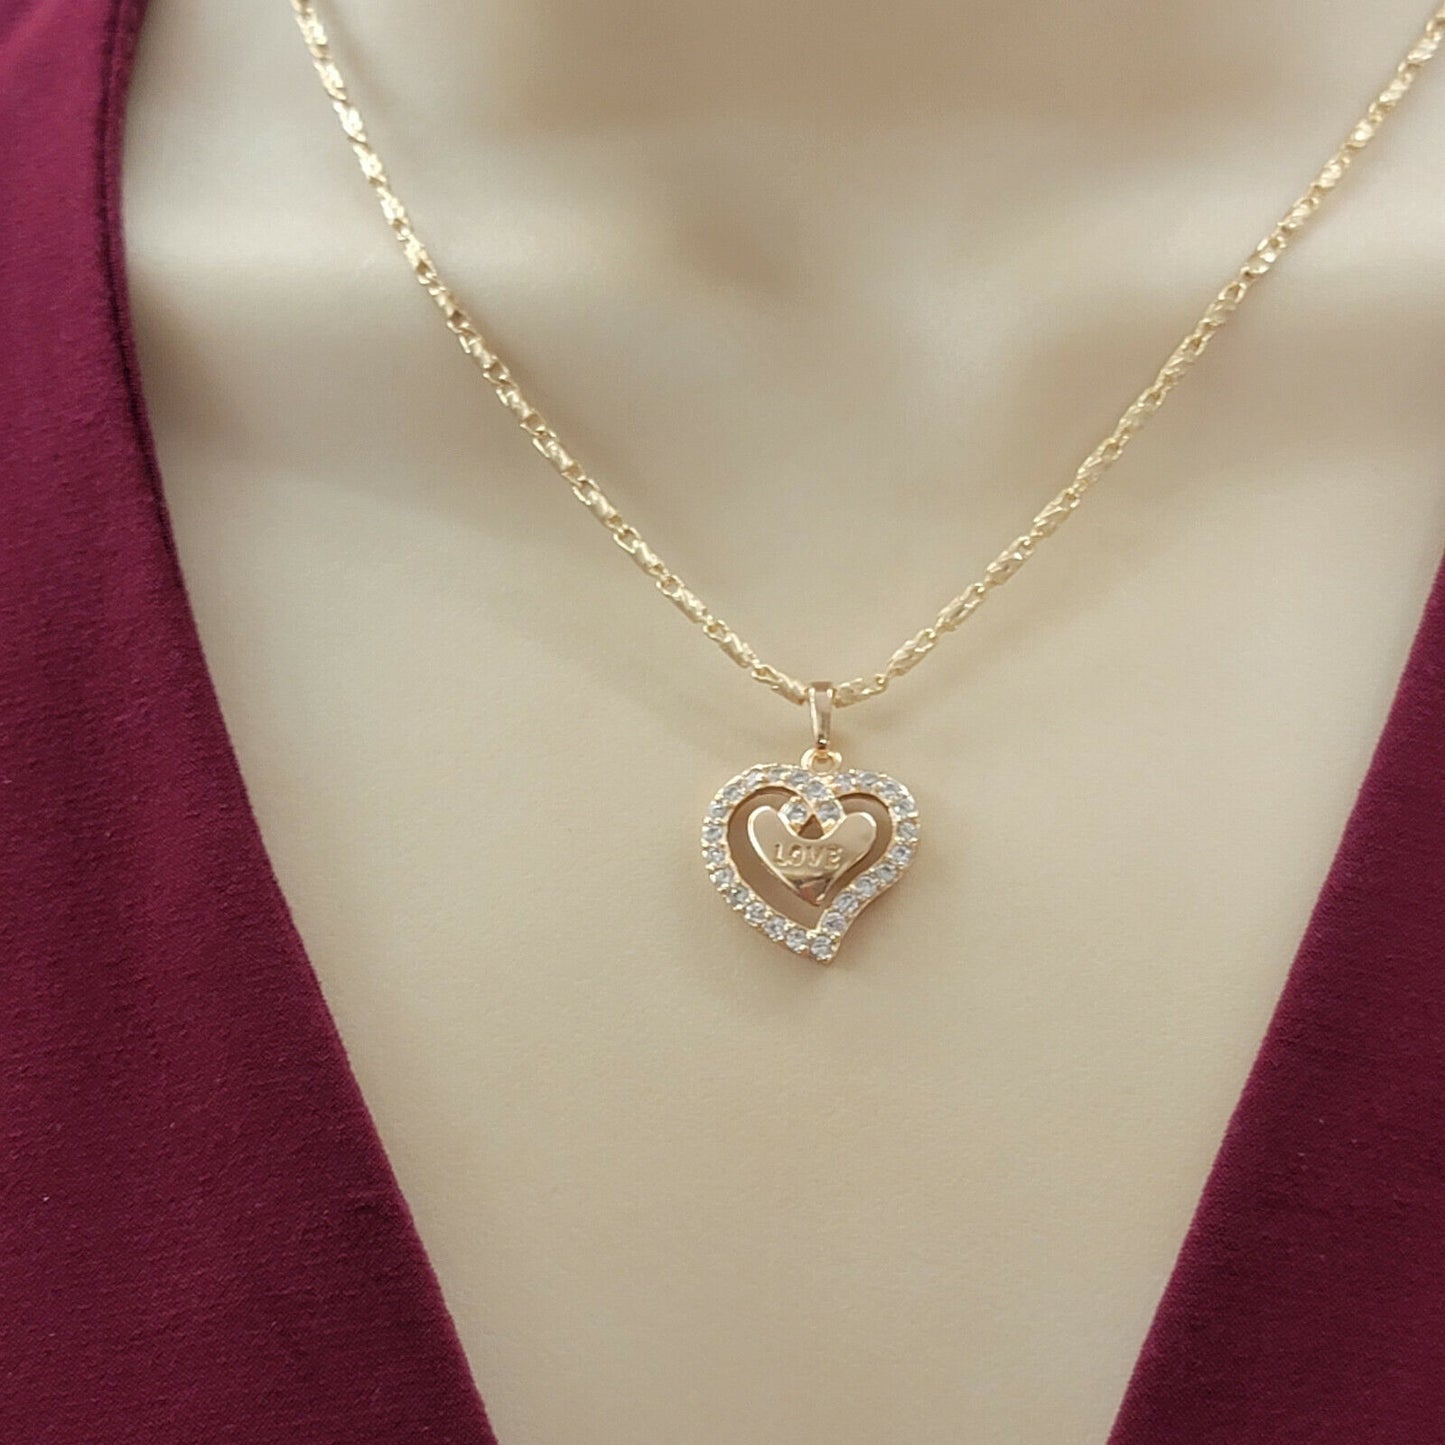 Necklaces - 18K Gold Plated. CZ Heart LOVE letters Pendant & Chain.